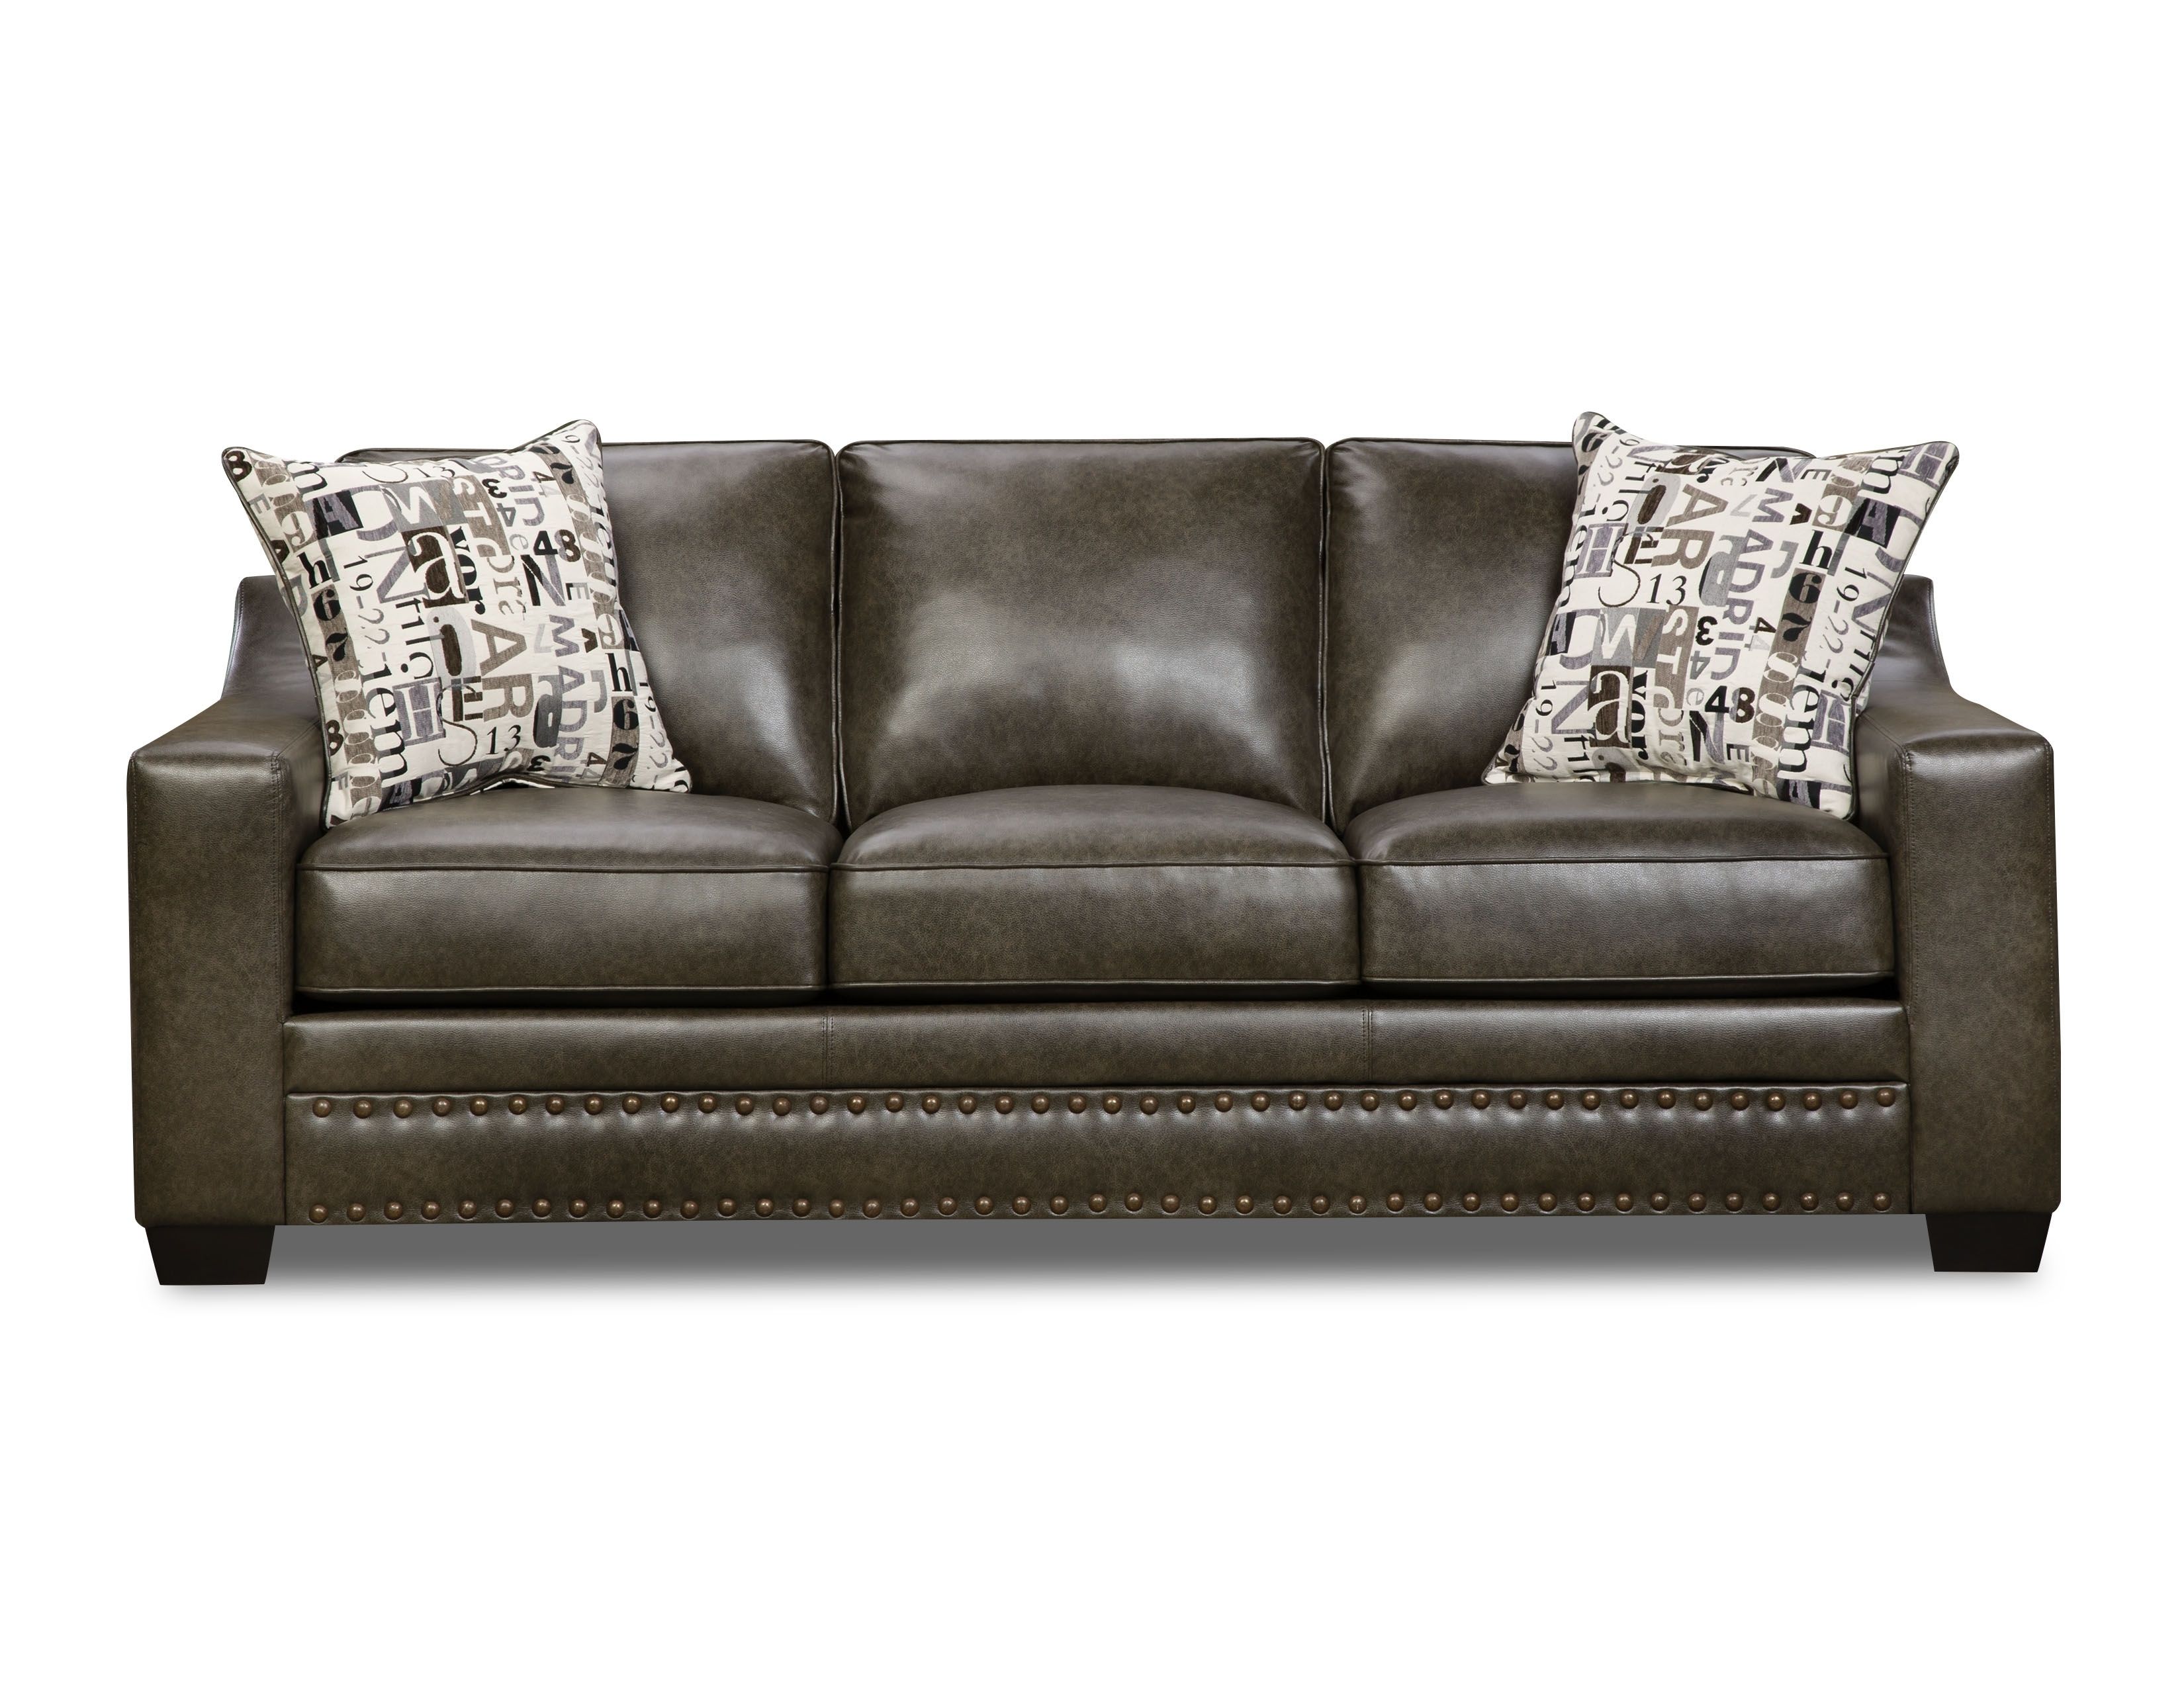 Sectional Sofa Bed Sears • Sofa Bed In Sectional Sofas At Sears (View 9 of 10)